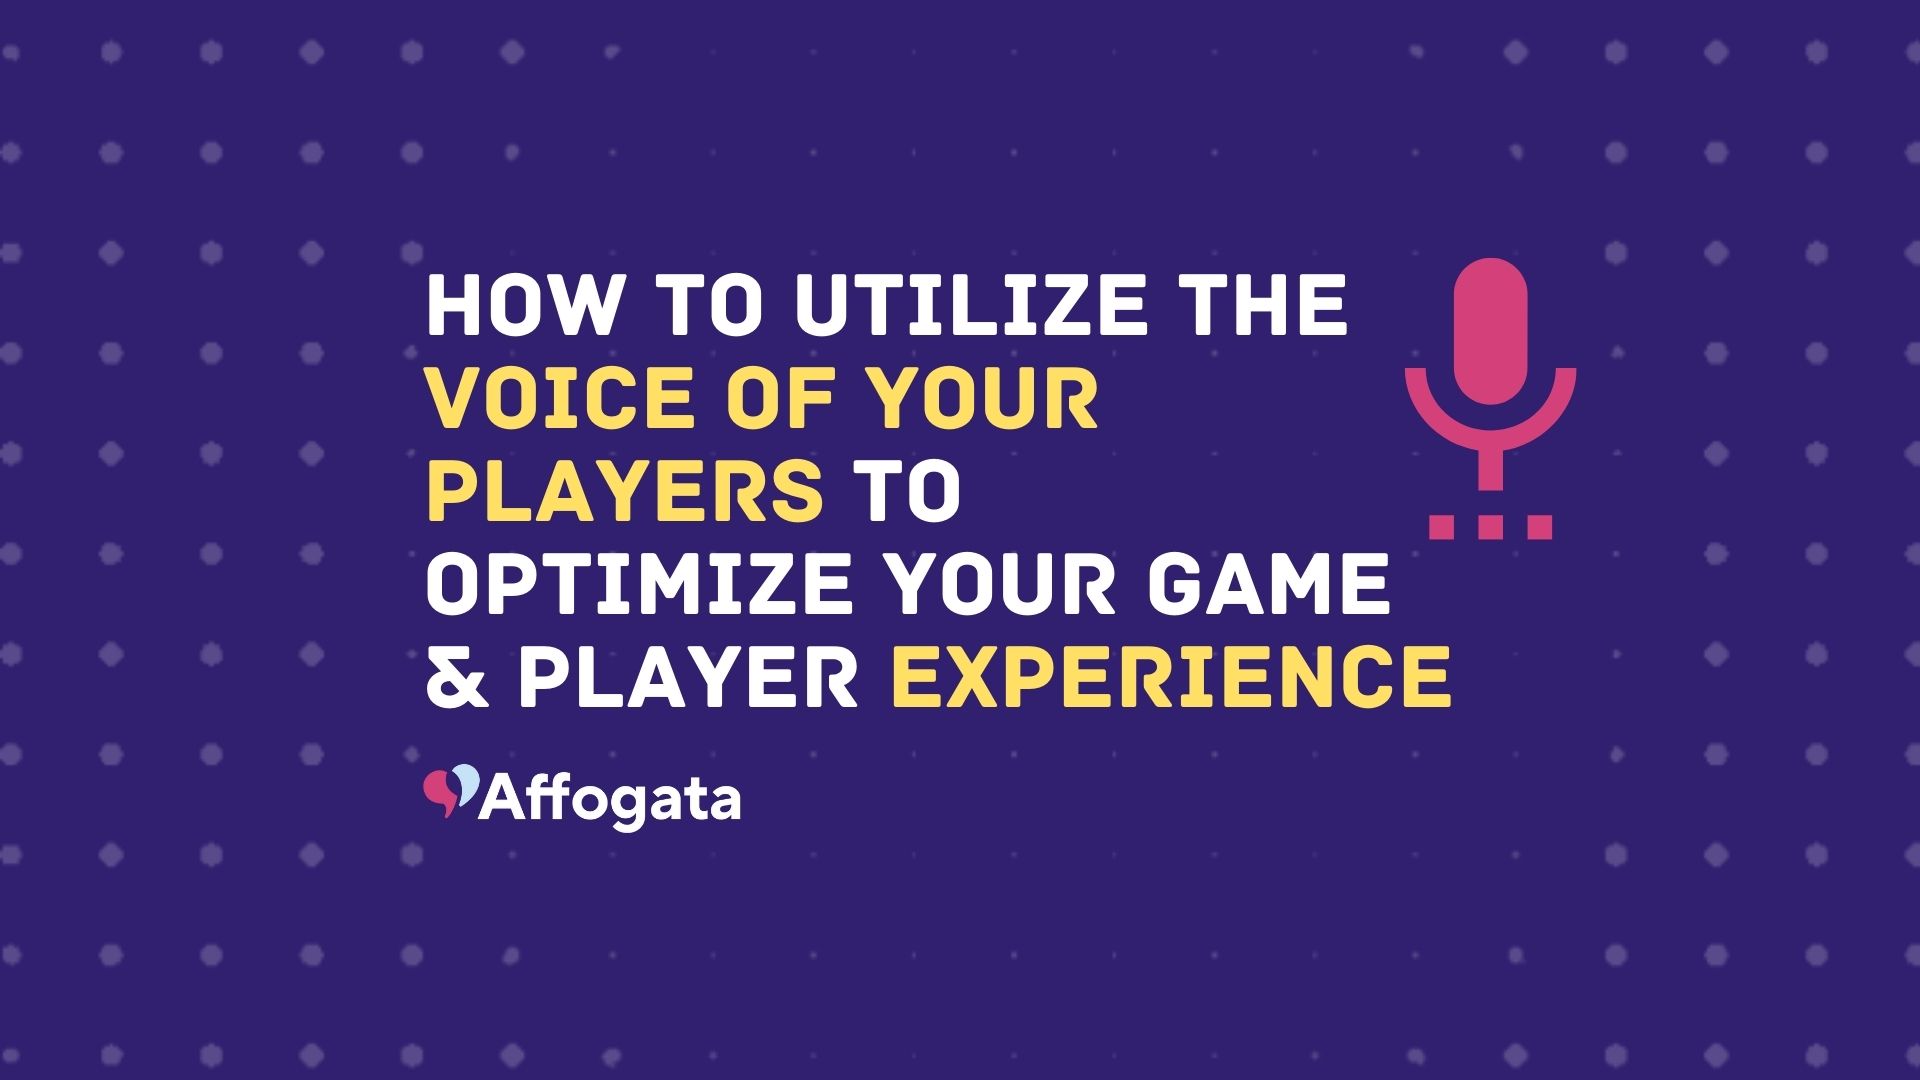 How to utilize the voice of your players to optimize your game & player experience